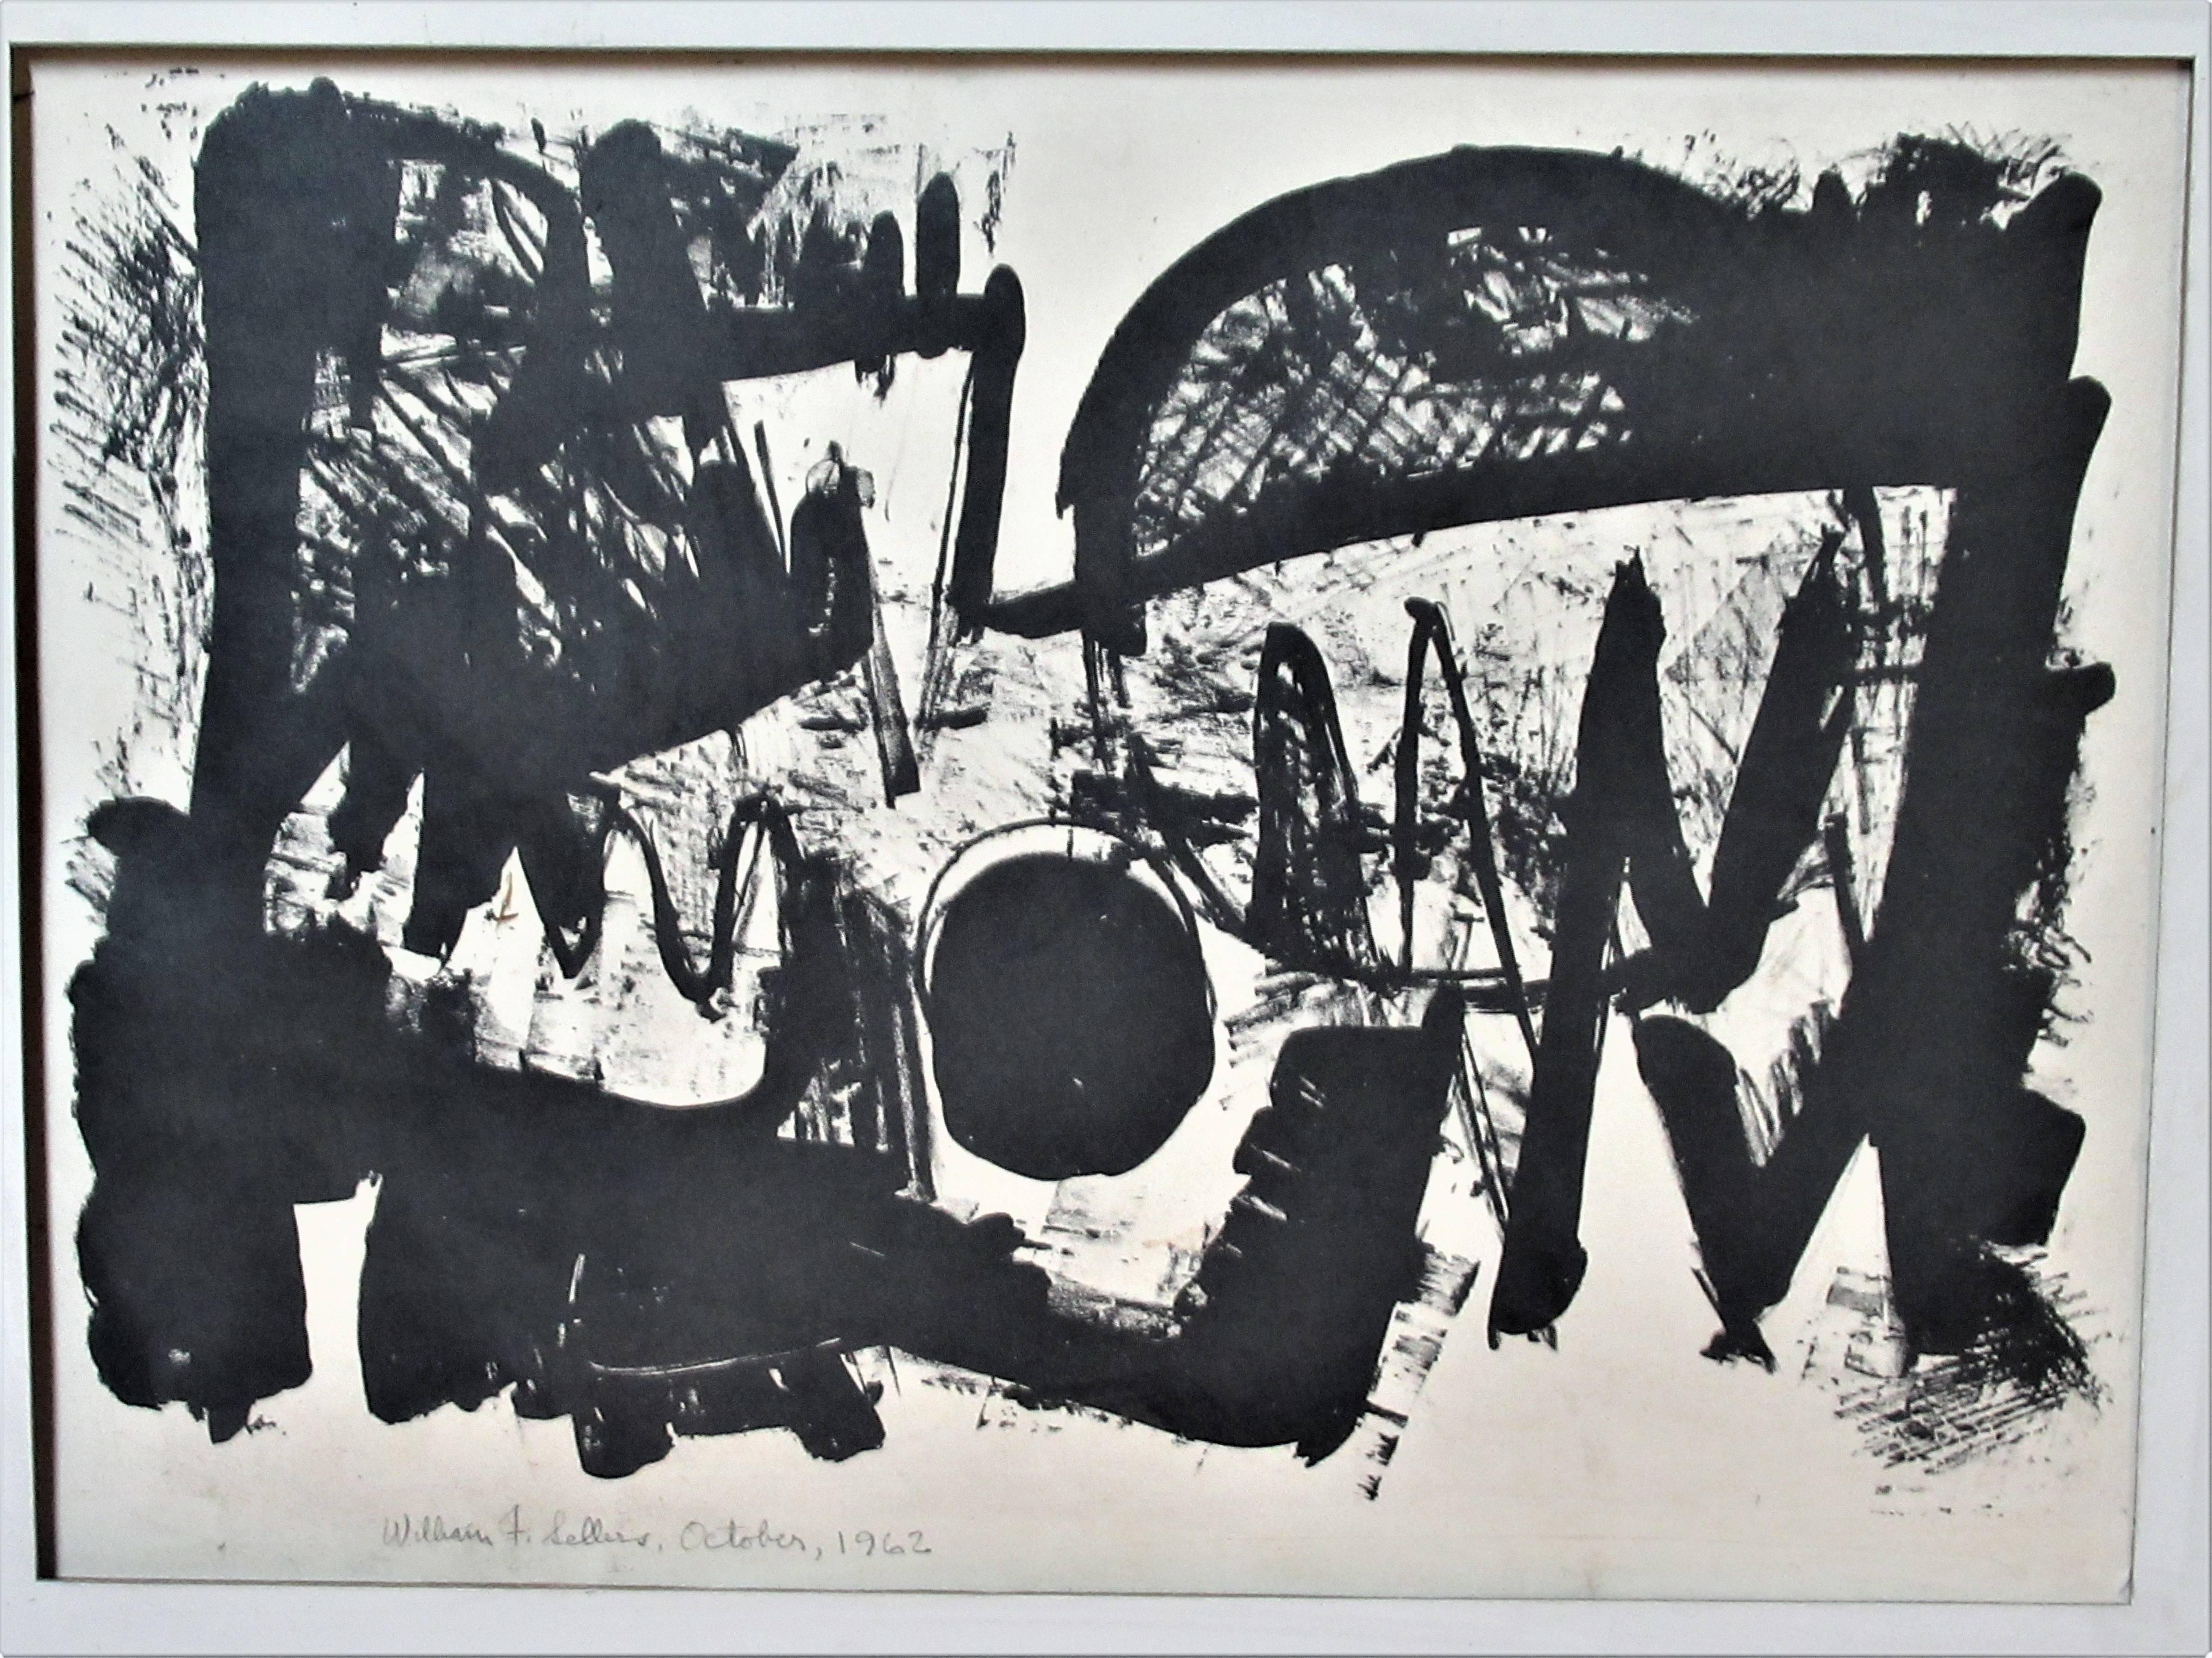 A striking sculptural abstract black and white lithograph print on paper in the original period cardboard matte by well exhibited award winning American metal sculptor artist William F. Sellers ( 1929 - 2019 ) pencil signed and dated lower left